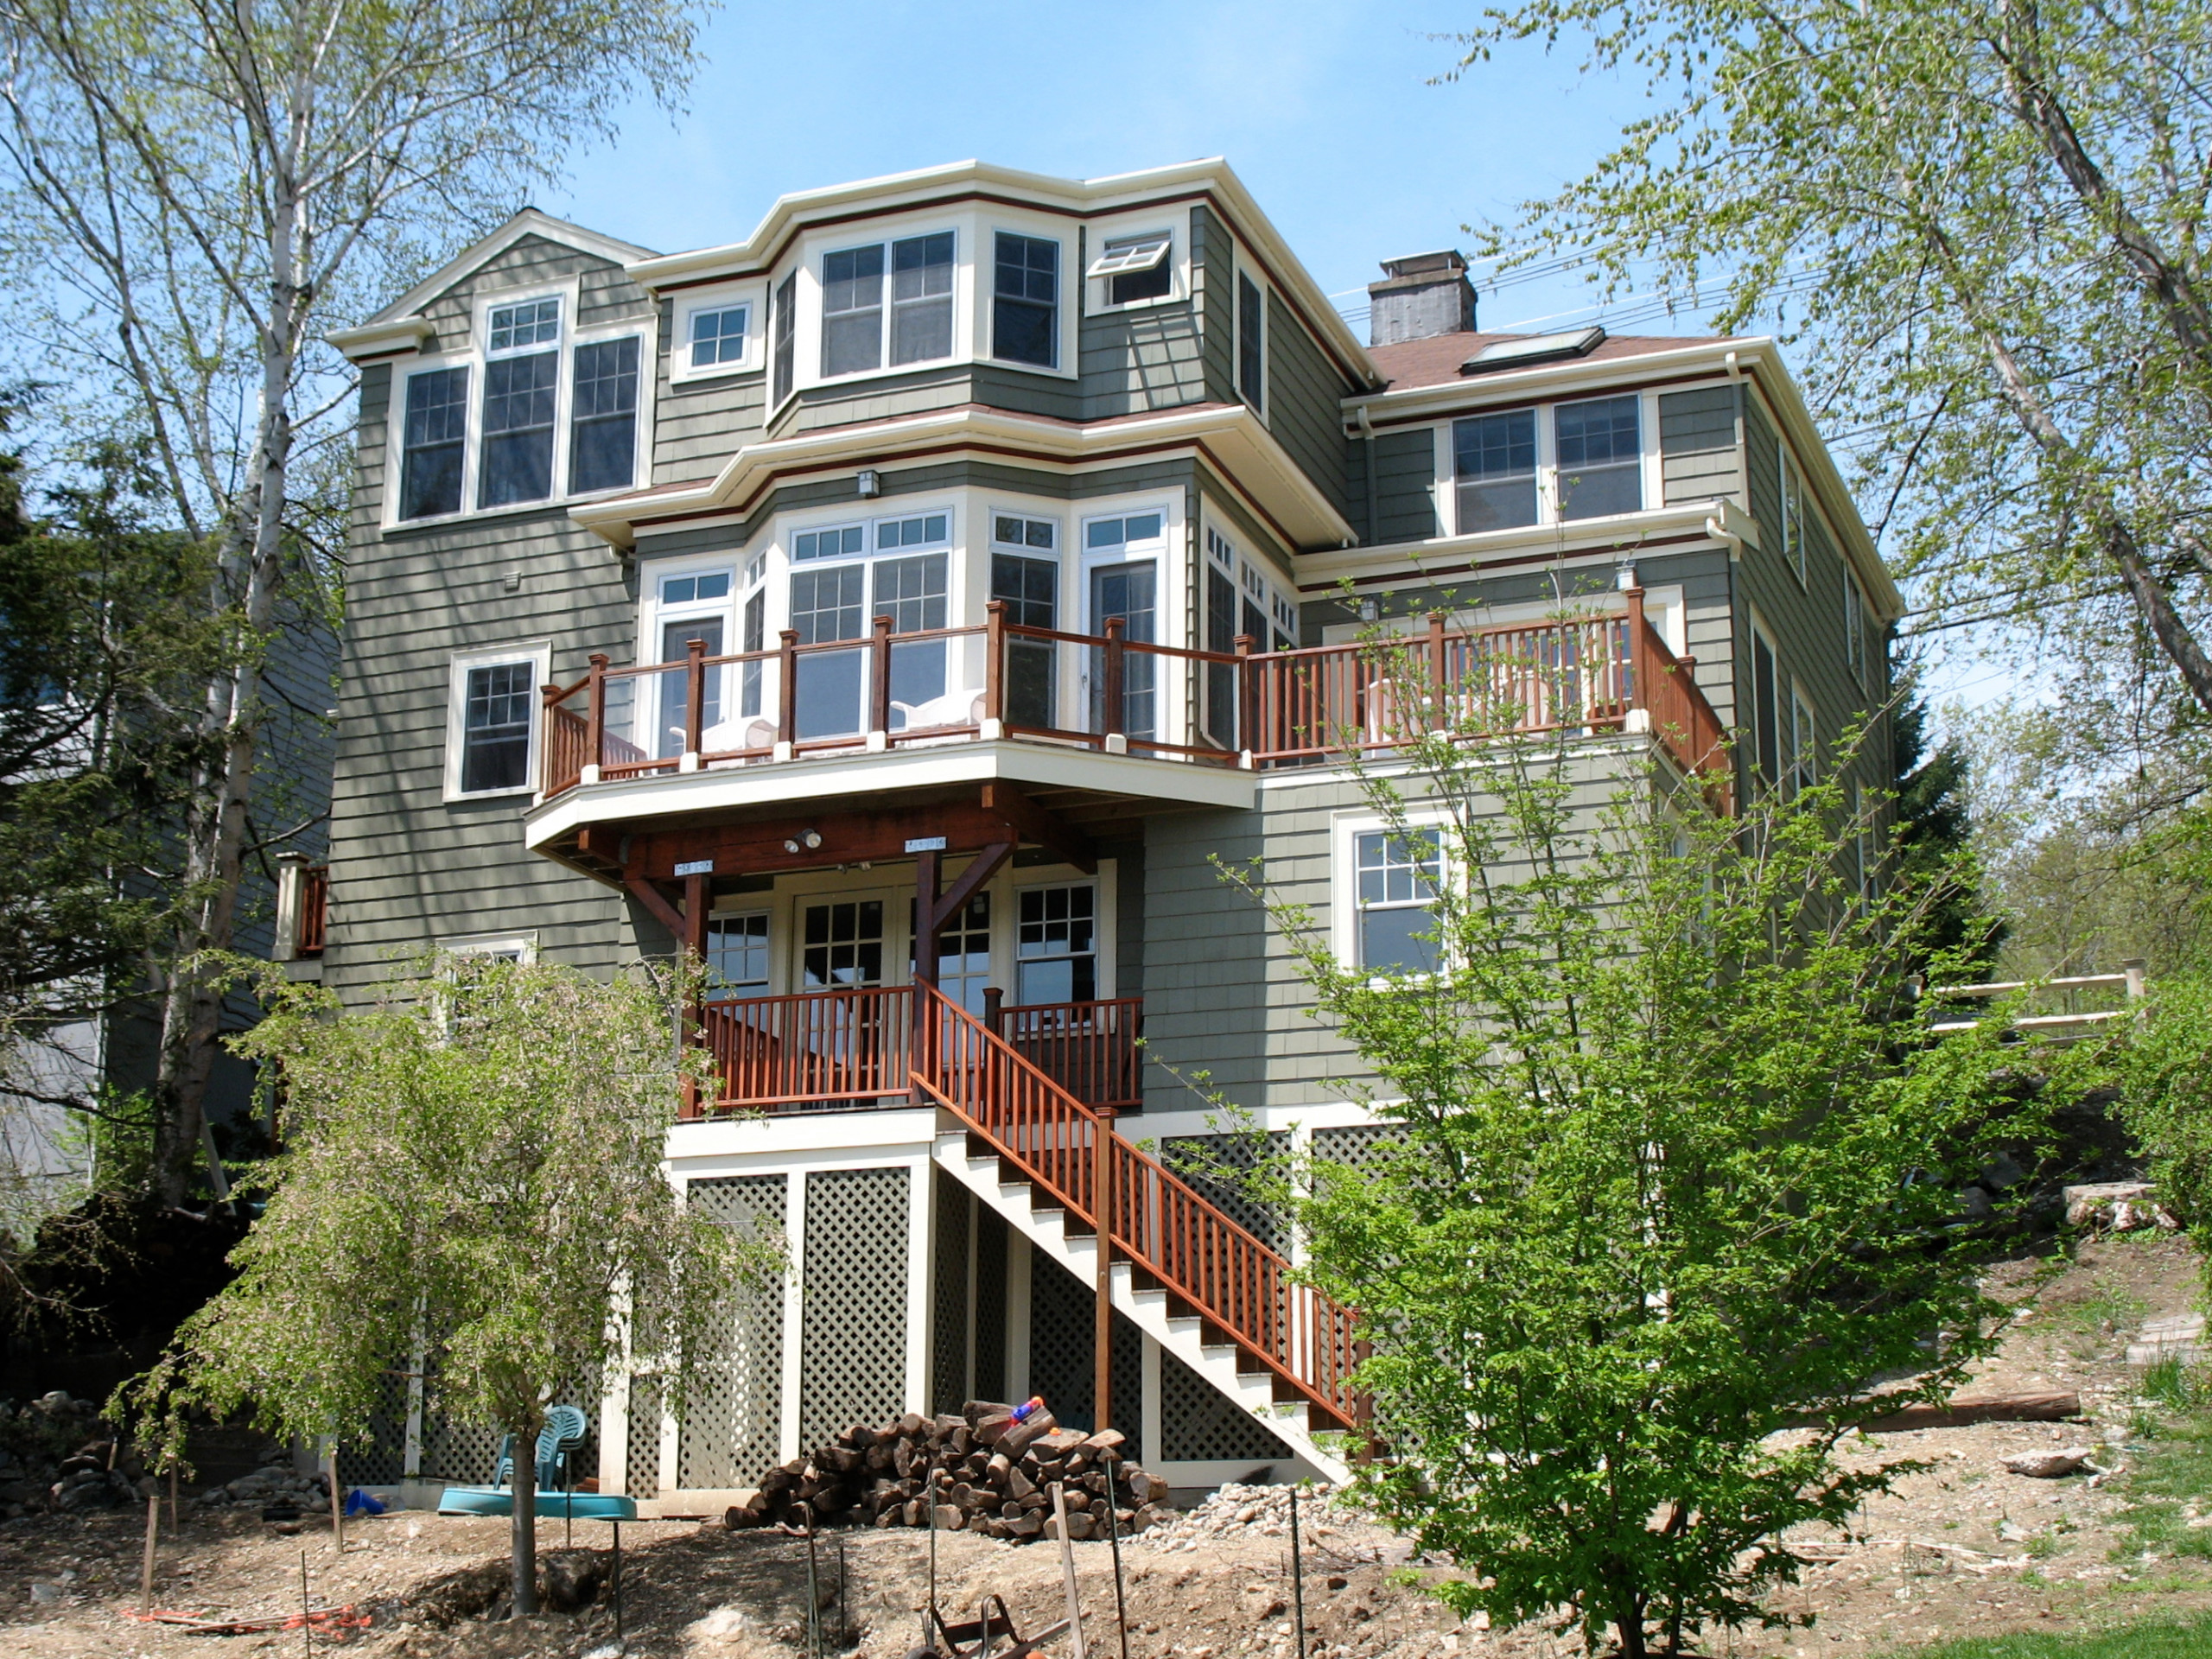 85 Pond St., Winchester, MA -  Addition